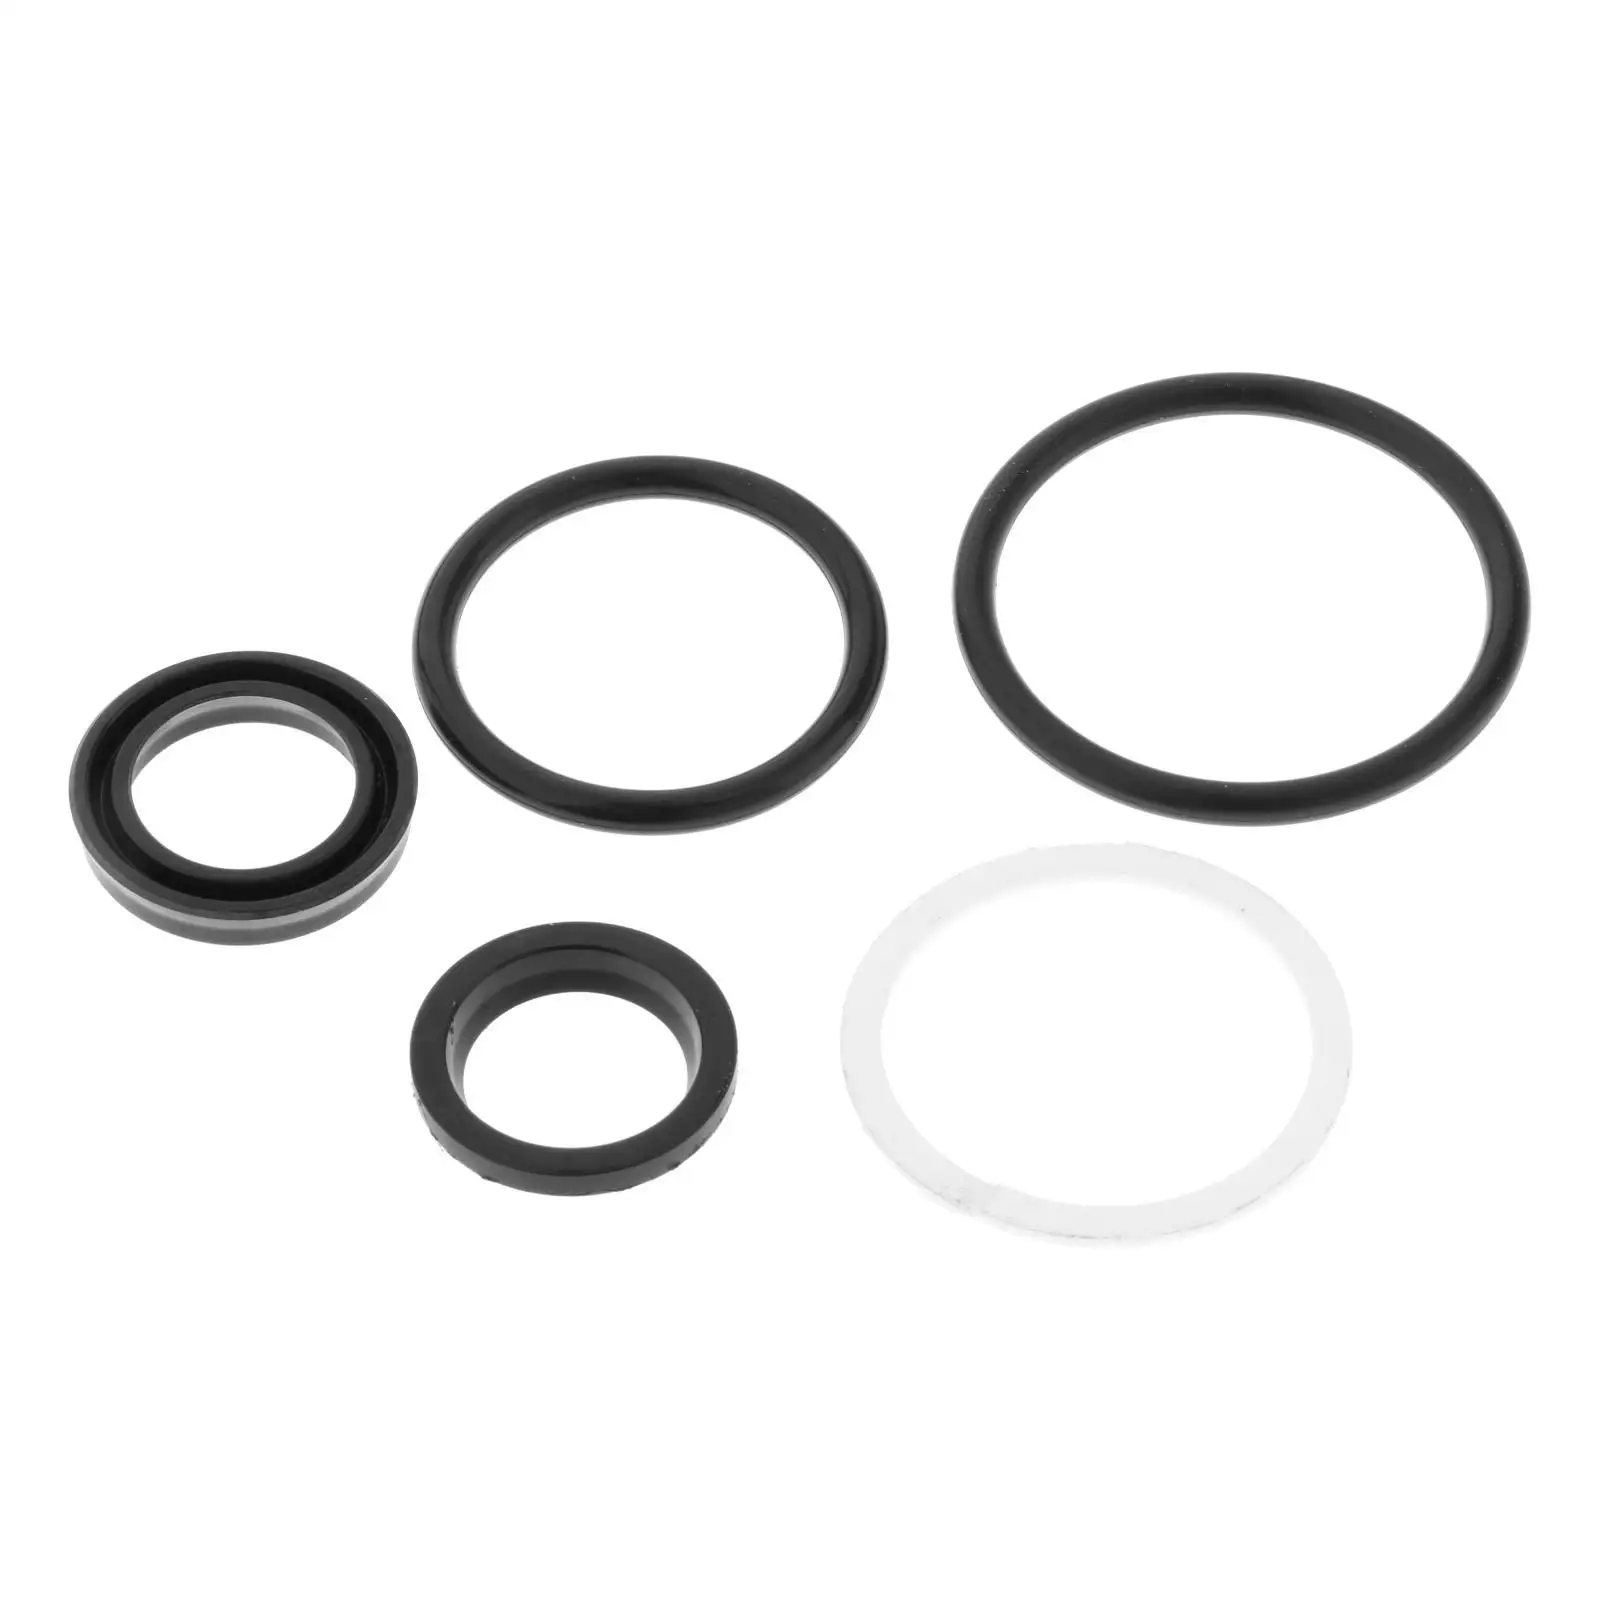 Seal and O-Ring Screw Trim Cylinder Repair Kit Replaces 6E5-43874-01 Ring Trim Cylinder Repair Kit Fit for Yamaha Outboard